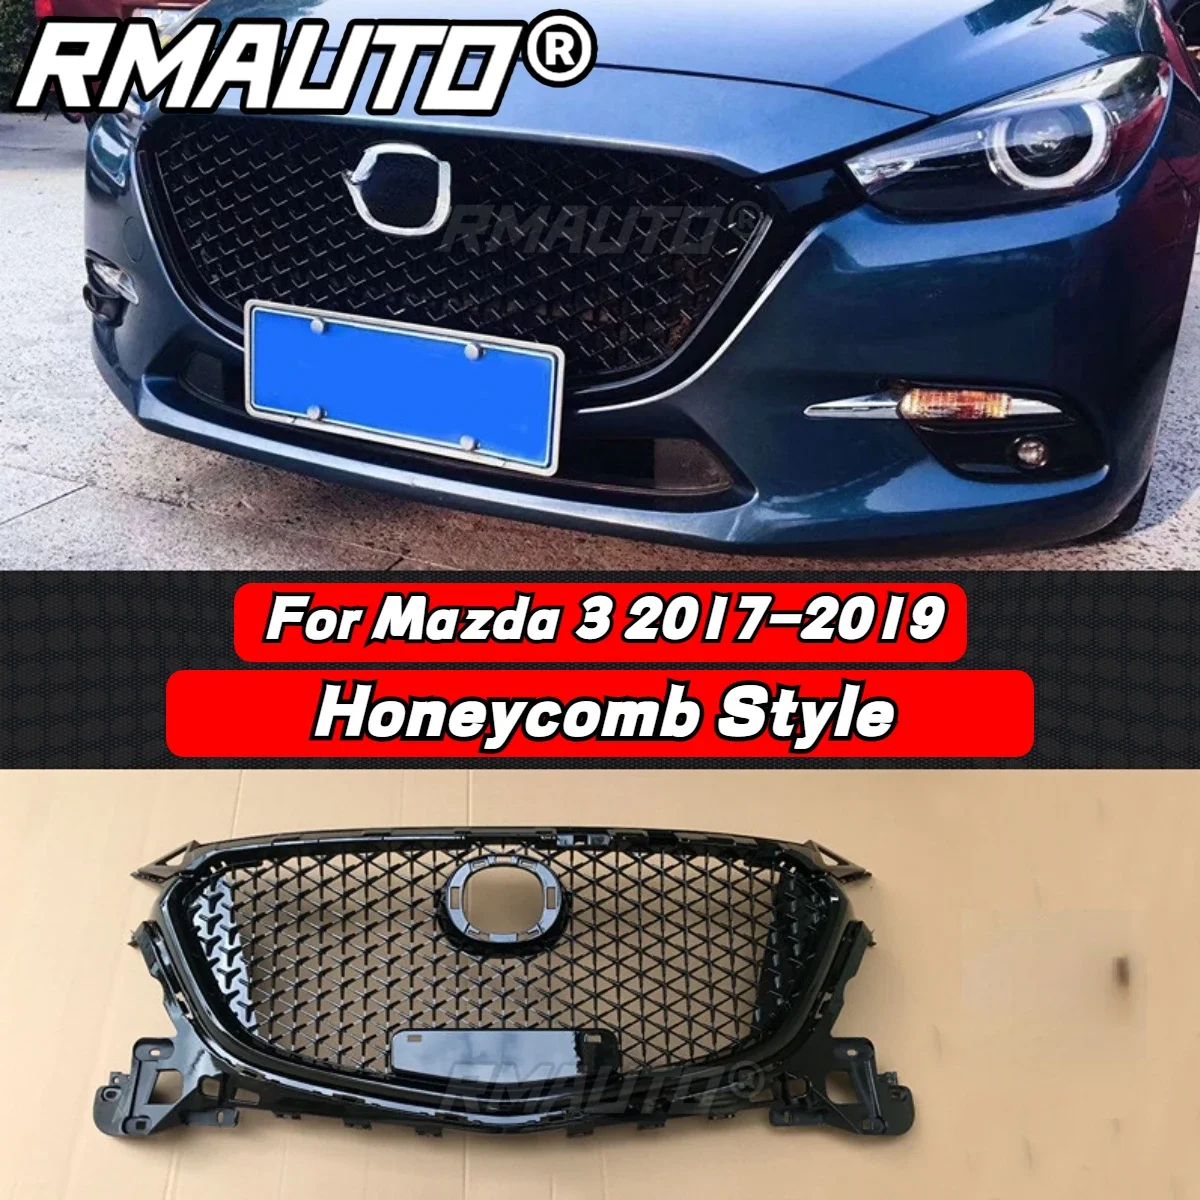 

For Mazda 3 Axela 2017-2019 Honeycomb Style Racing Grill Gloss Black Front Bumper Grille Body Kit Mazda 3 Axela Car Accessories